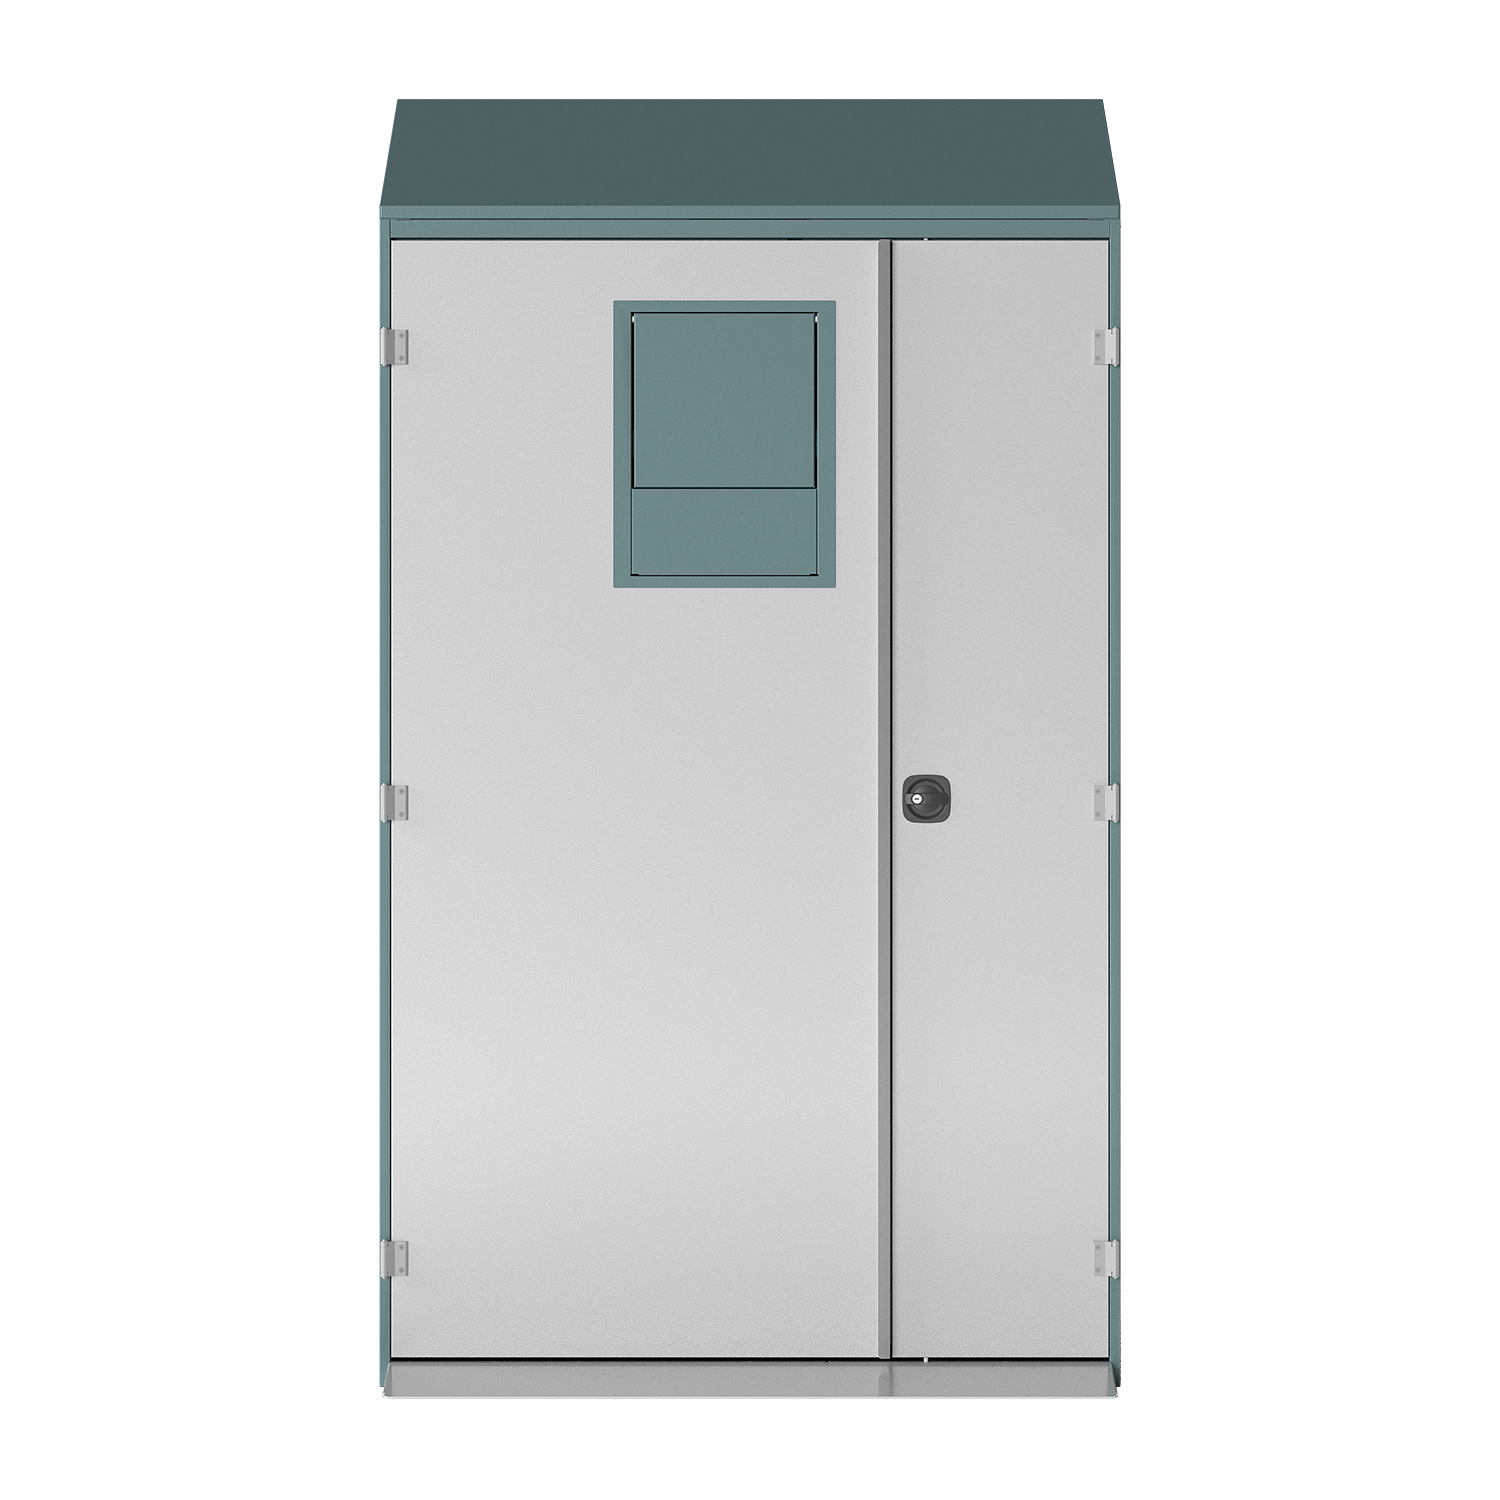 texReturn TCR 200 – return cabinet for textiles